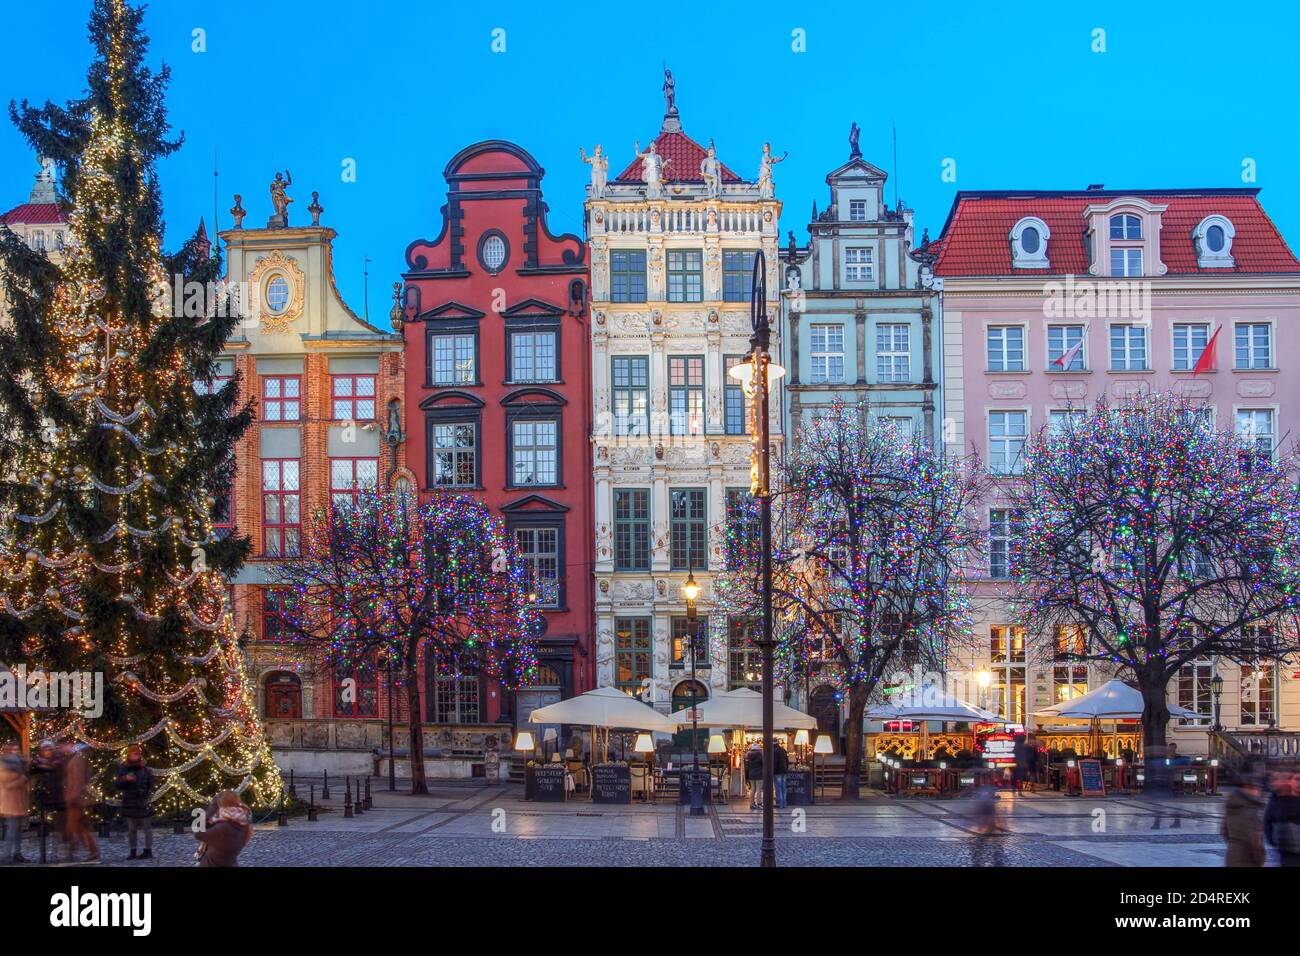 Historic guild houses on Dulga Street in downtown Gdansk, Poland during winter with Christmas decorations. Stock Photo